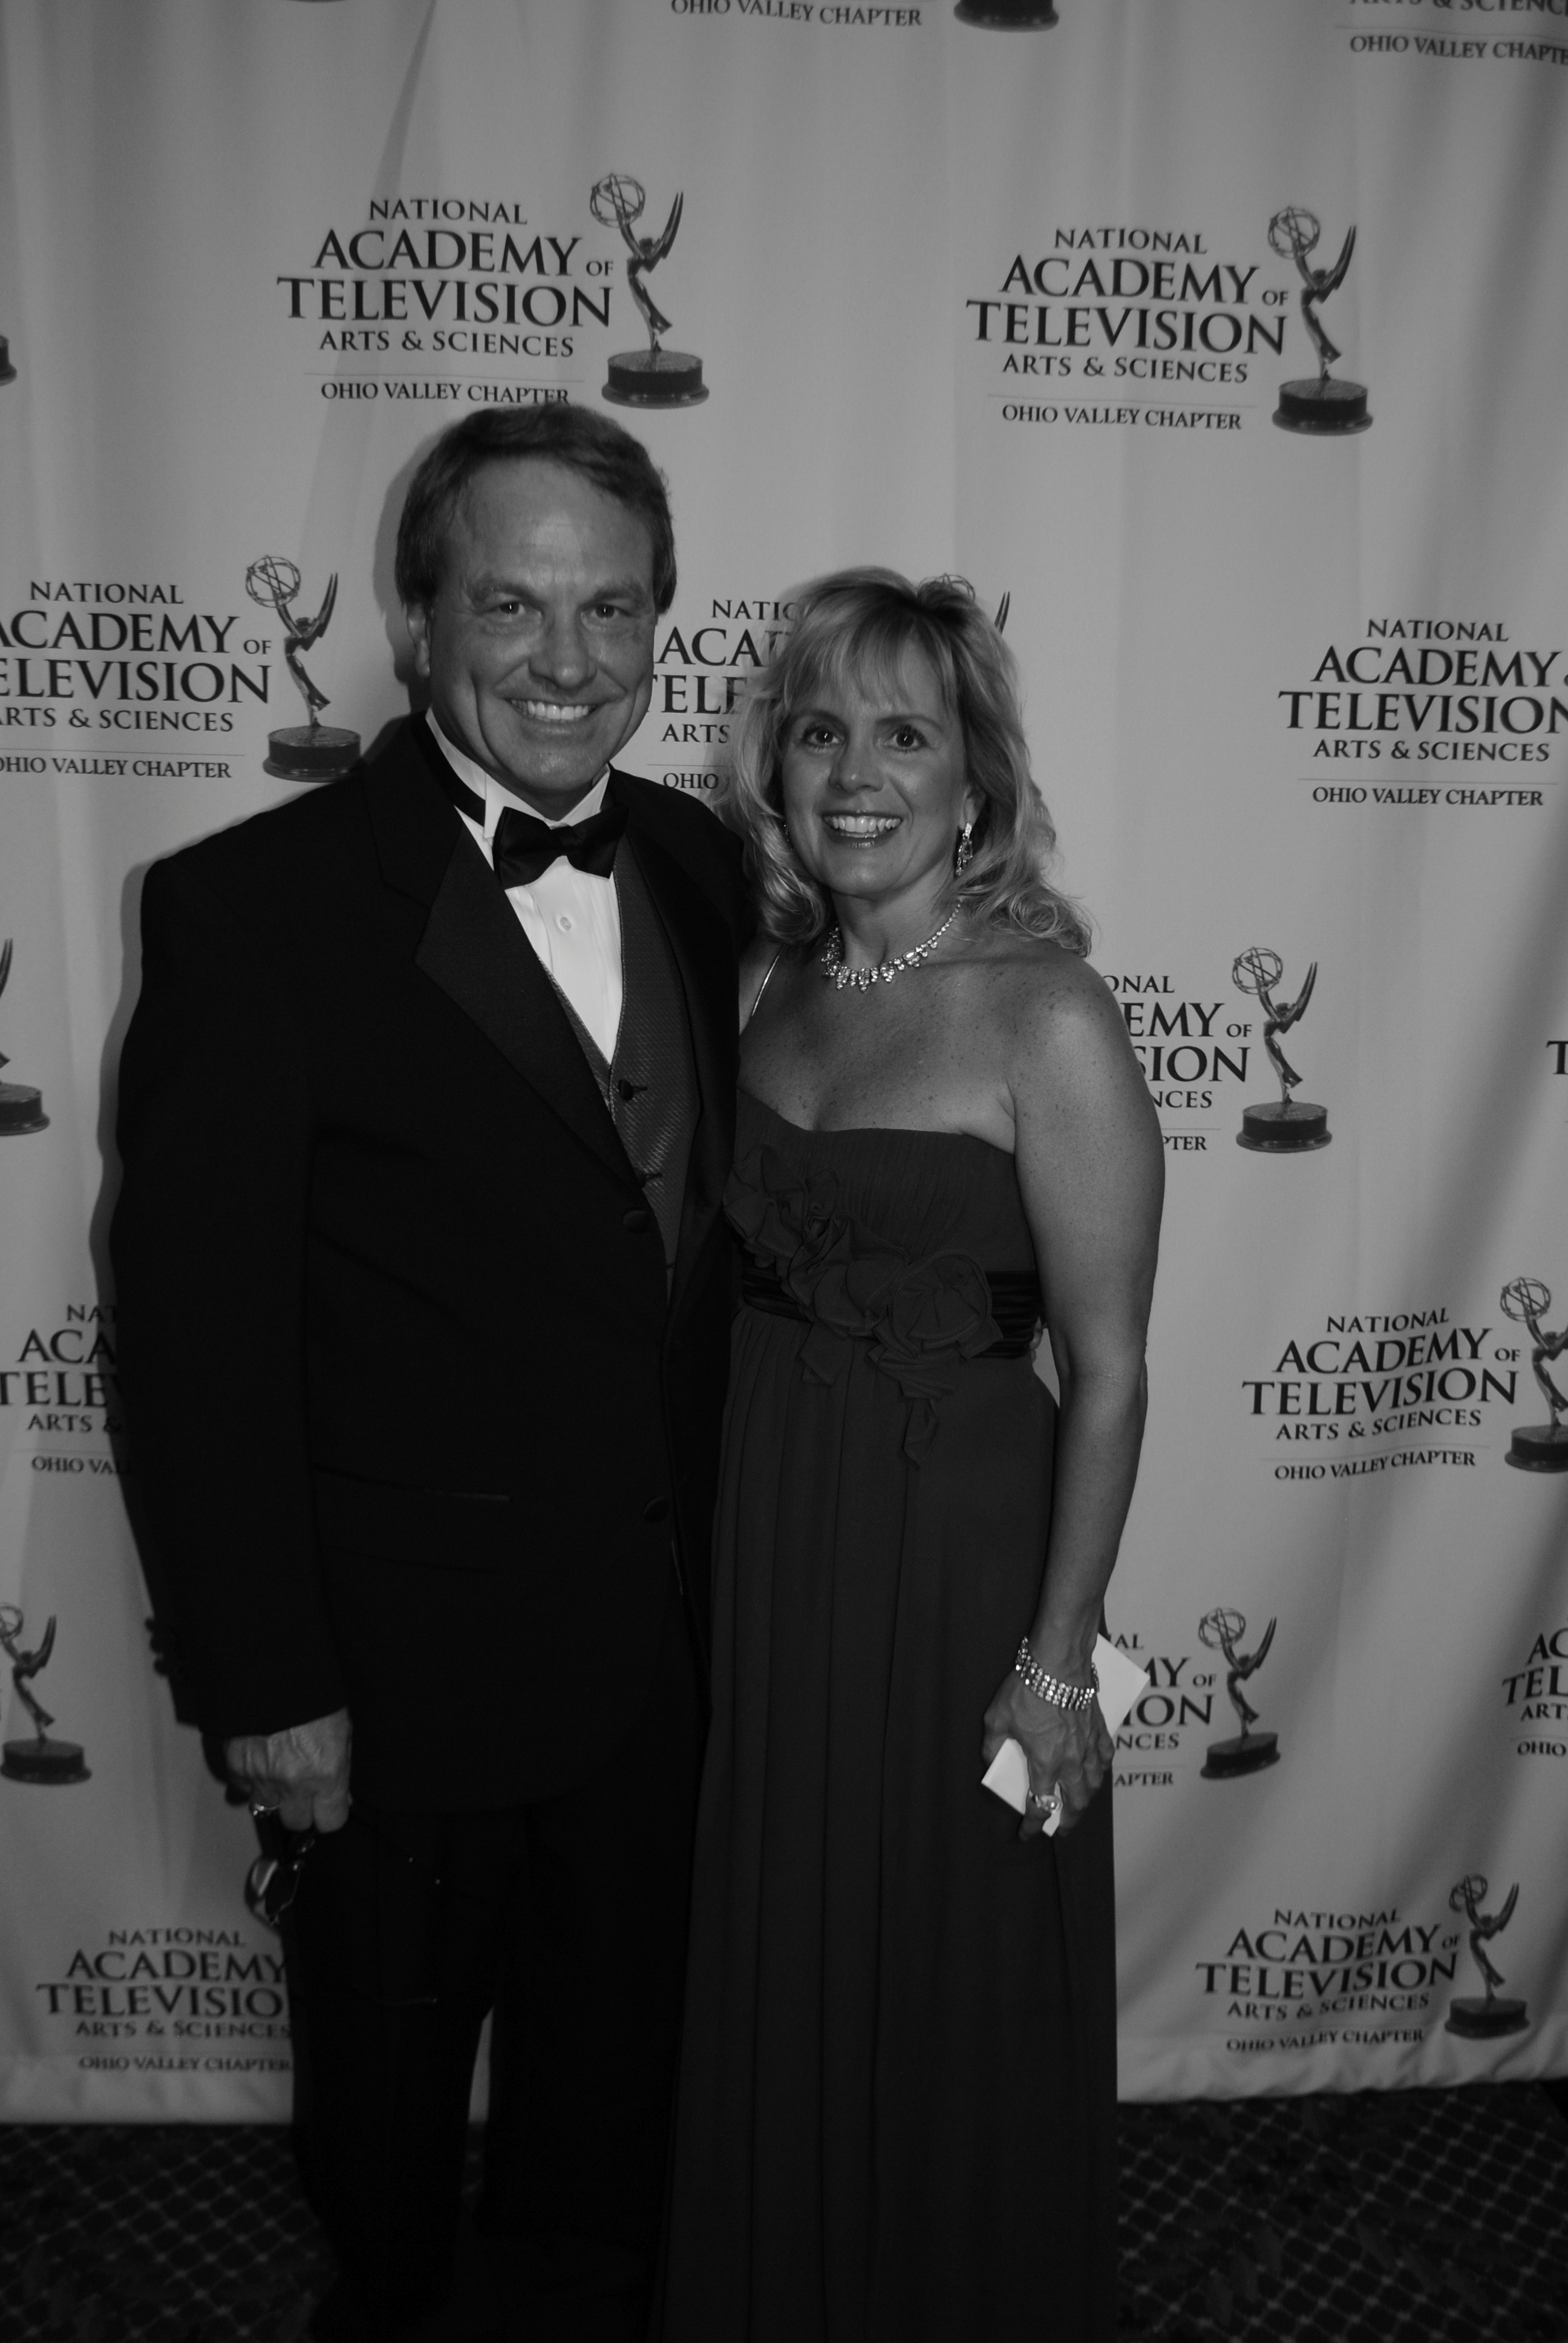 My fiance joins me at the EMMY Awards.